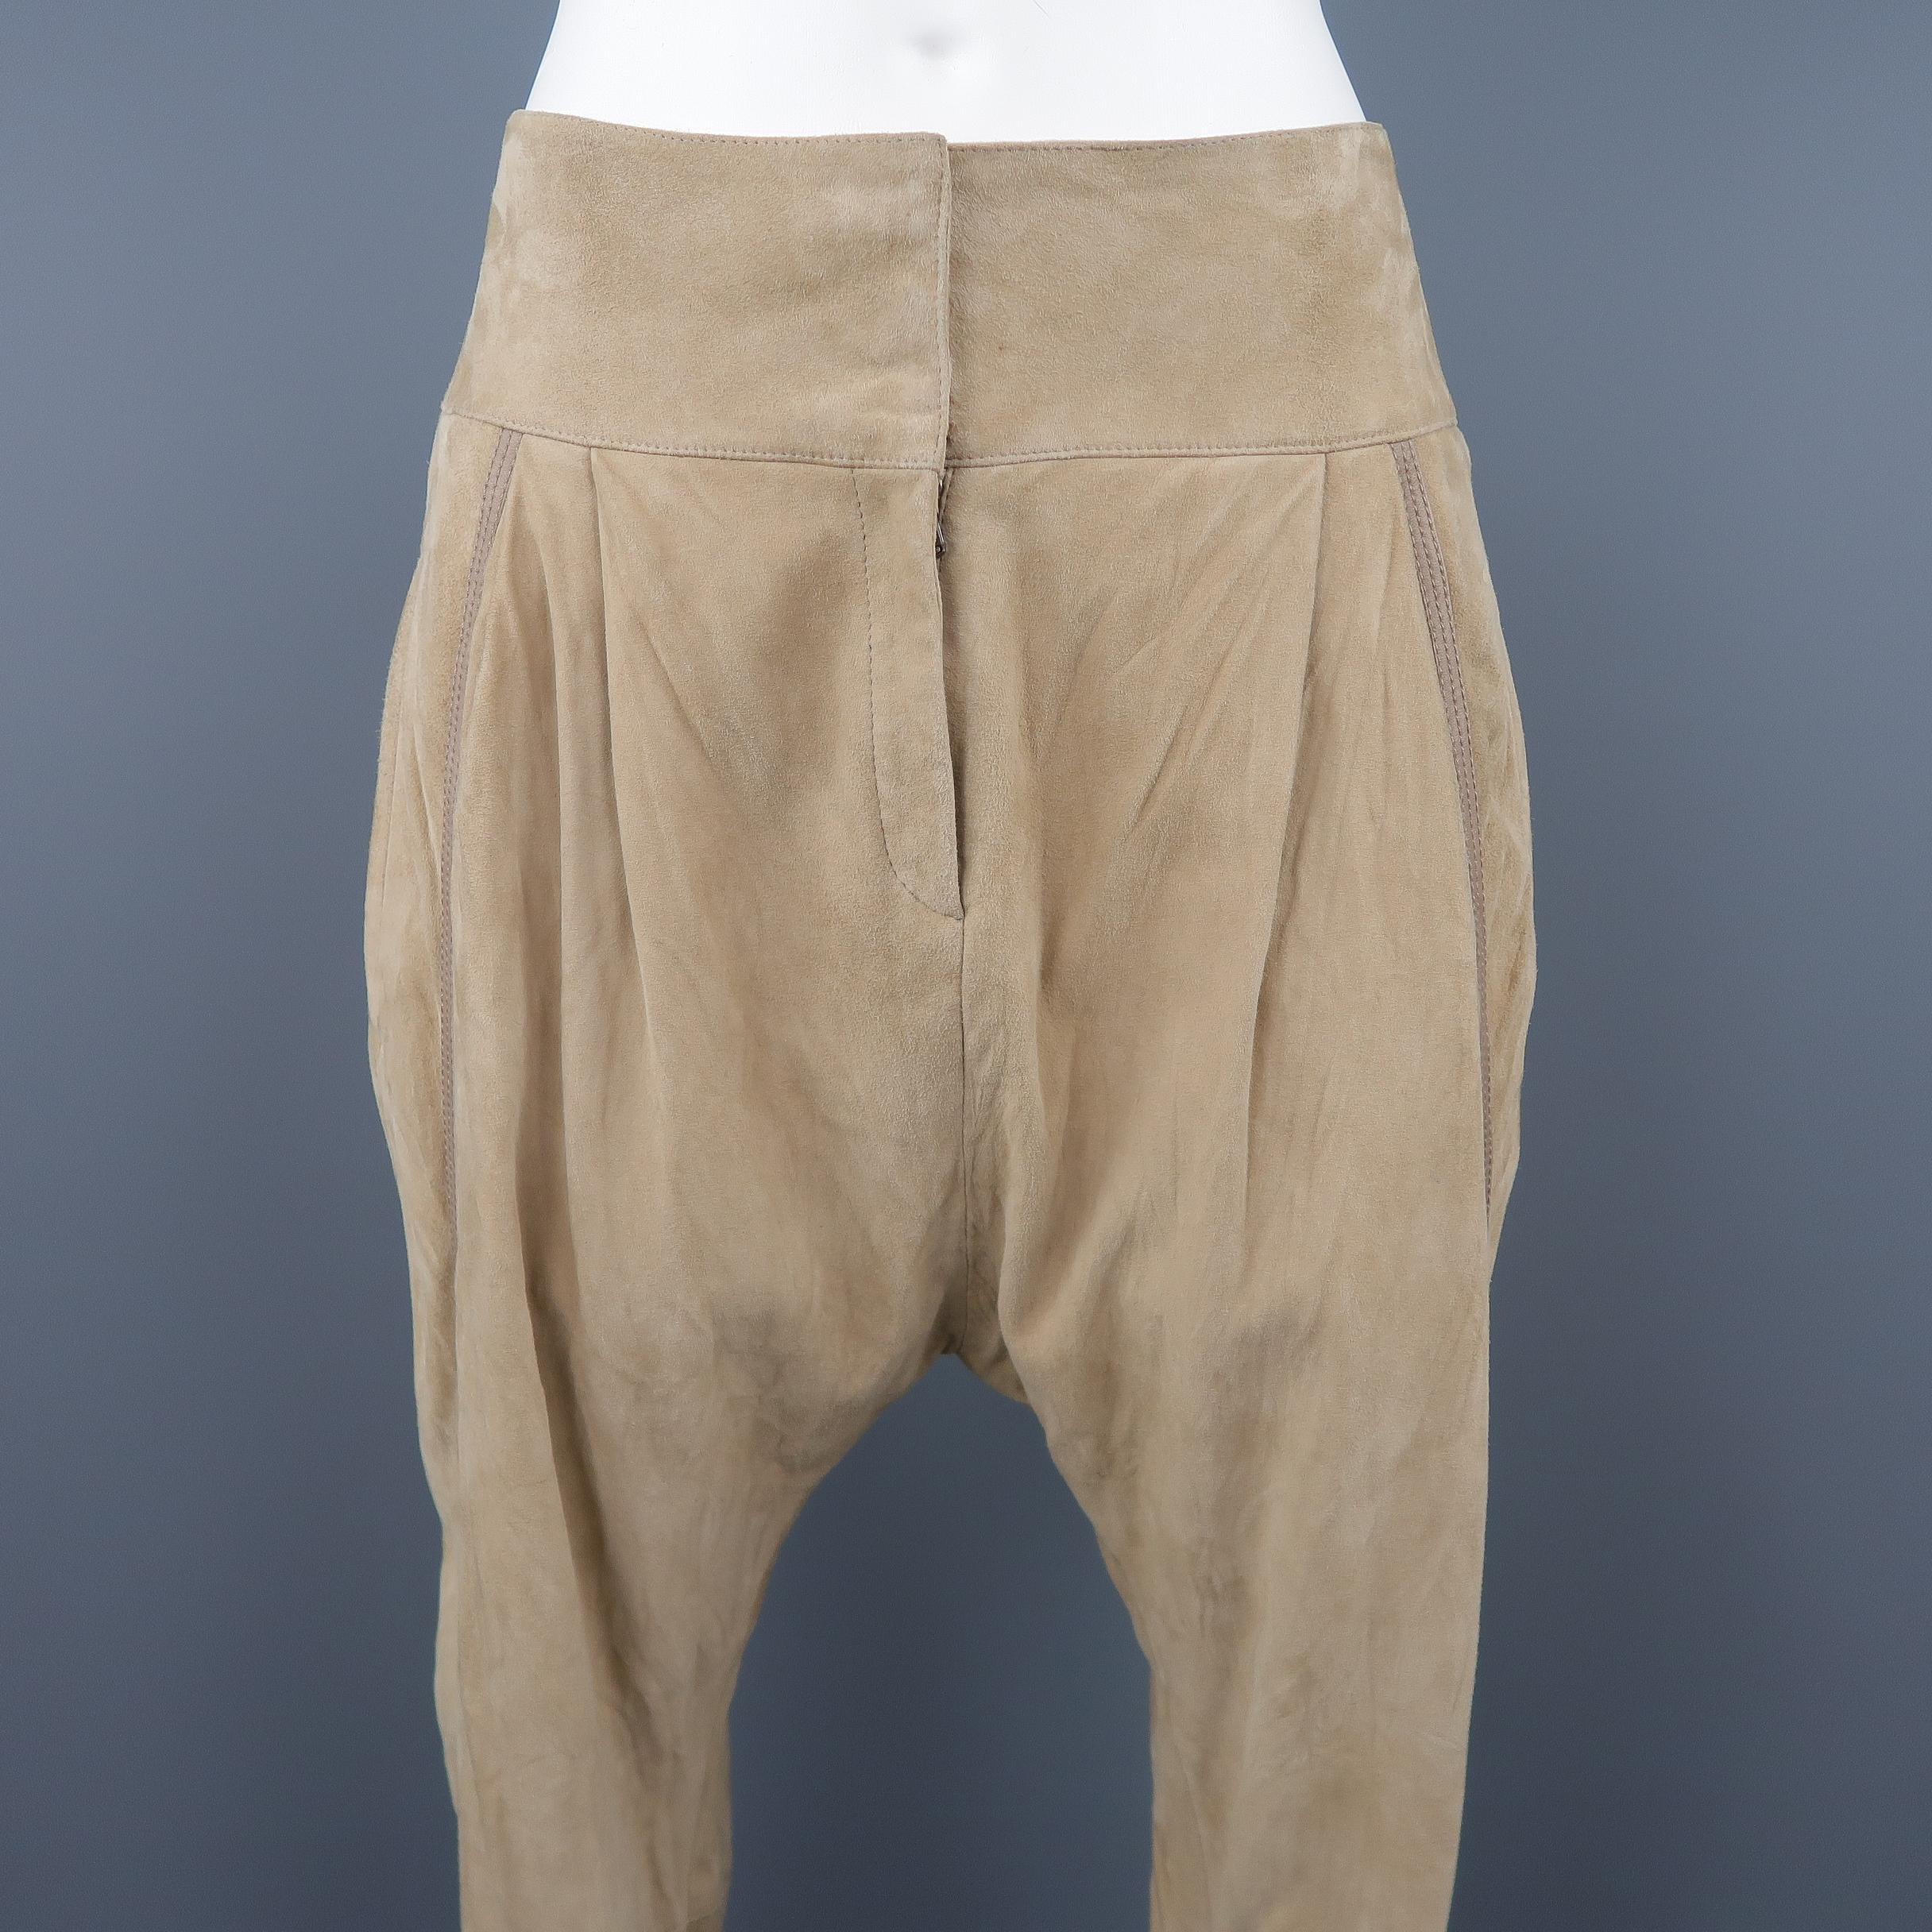 ROBERTO CAVALLI drop crotch pants come in beige suede with a thick waistband, pleated front, slit pockets, taupe leather trim, and skinny leg. Made in Italy.
 
Excellent Pre-Owned Condition.
Marked: IT 44
 
Measurements:
 
Waist: 33 in.
Hip: 42